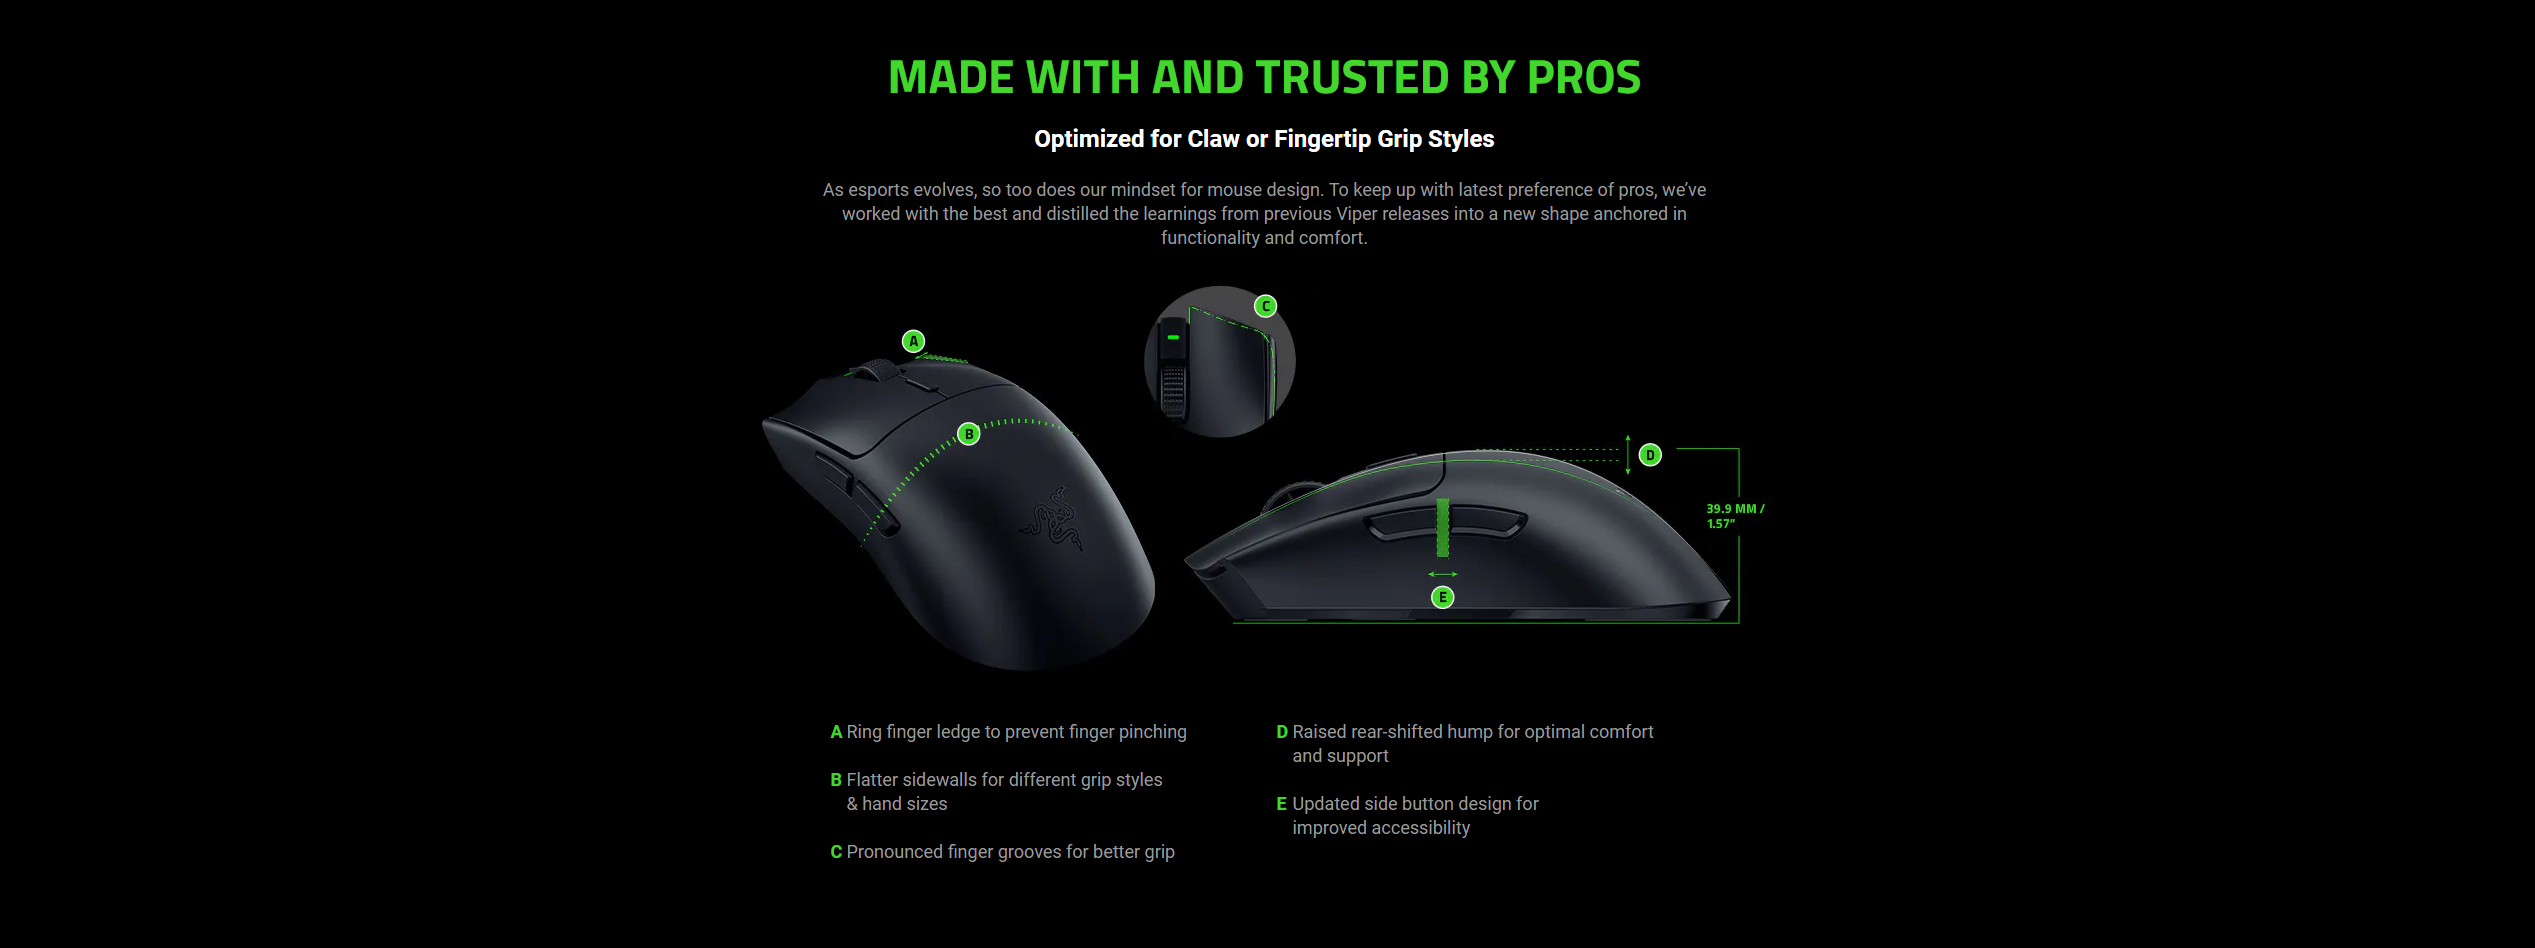 A large marketing image providing additional information about the product Razer Viper V3 HyperSpeed - Wireless eSports Gaming Mouse - Additional alt info not provided